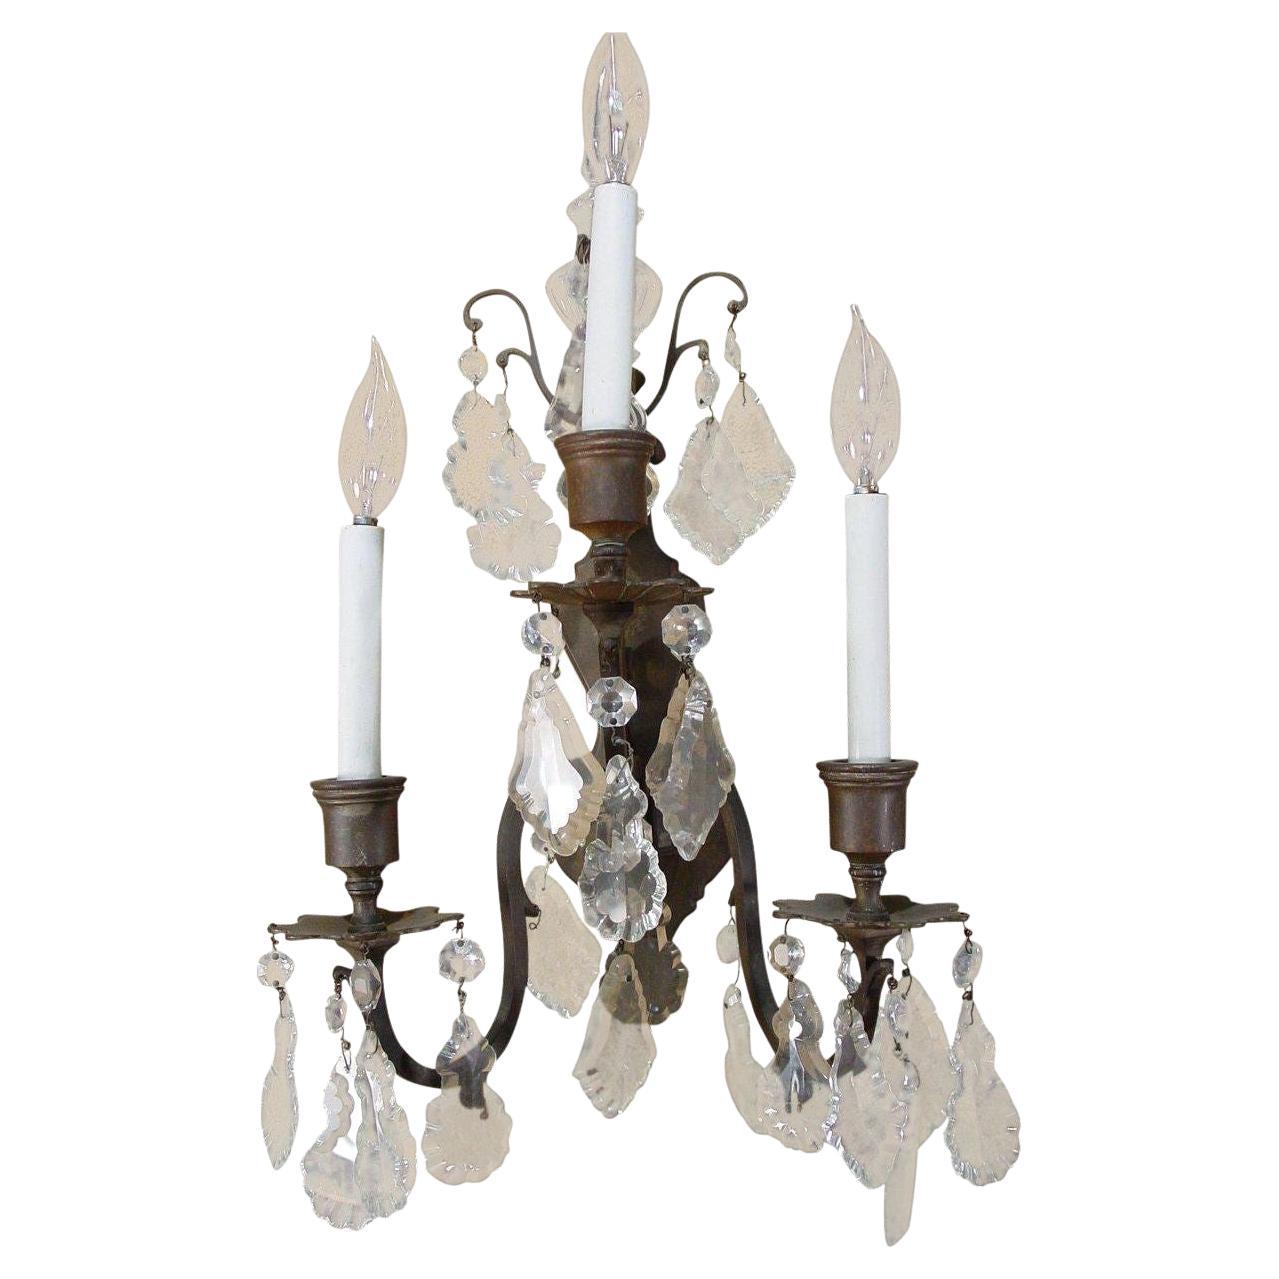 Early 20th Century Italian Cut Crystal Wall Sconces, a Pair For Sale